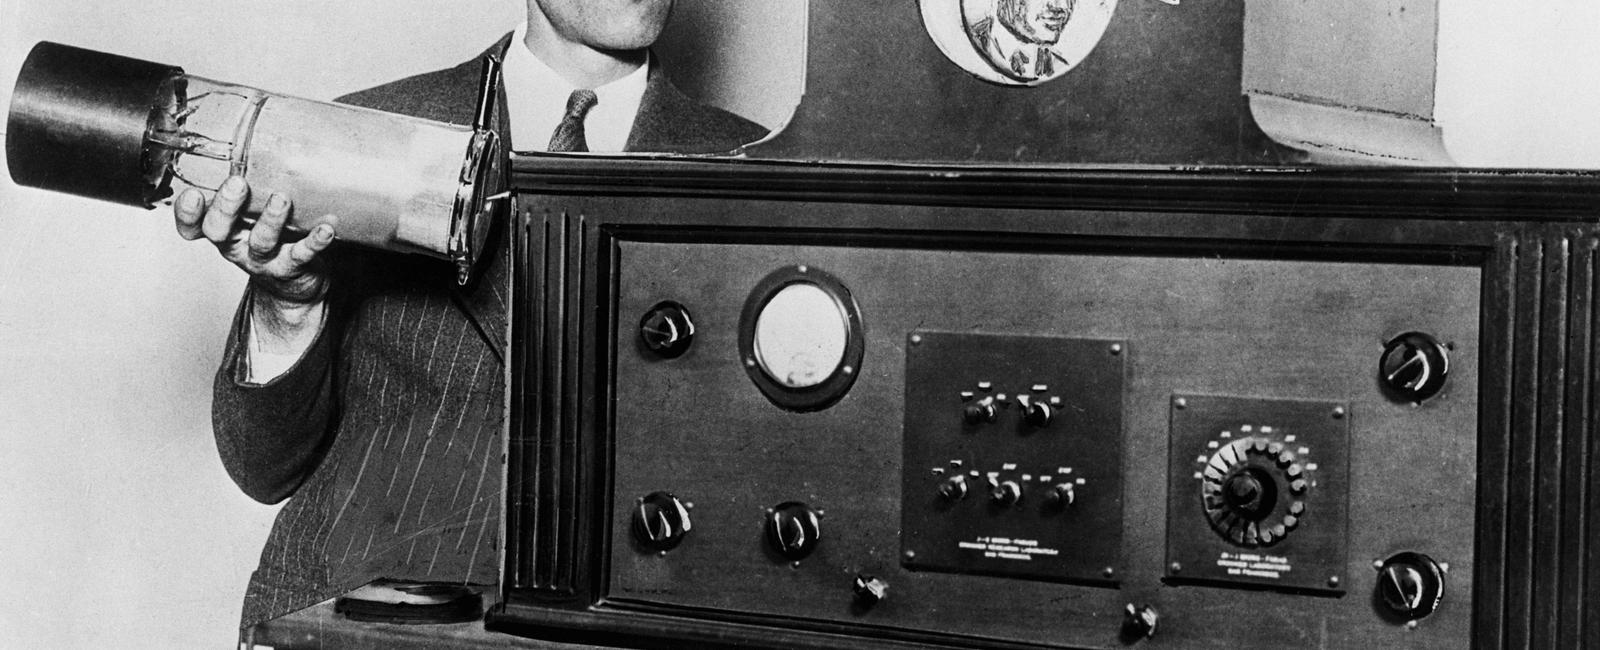 The first television broadcast was in 1925